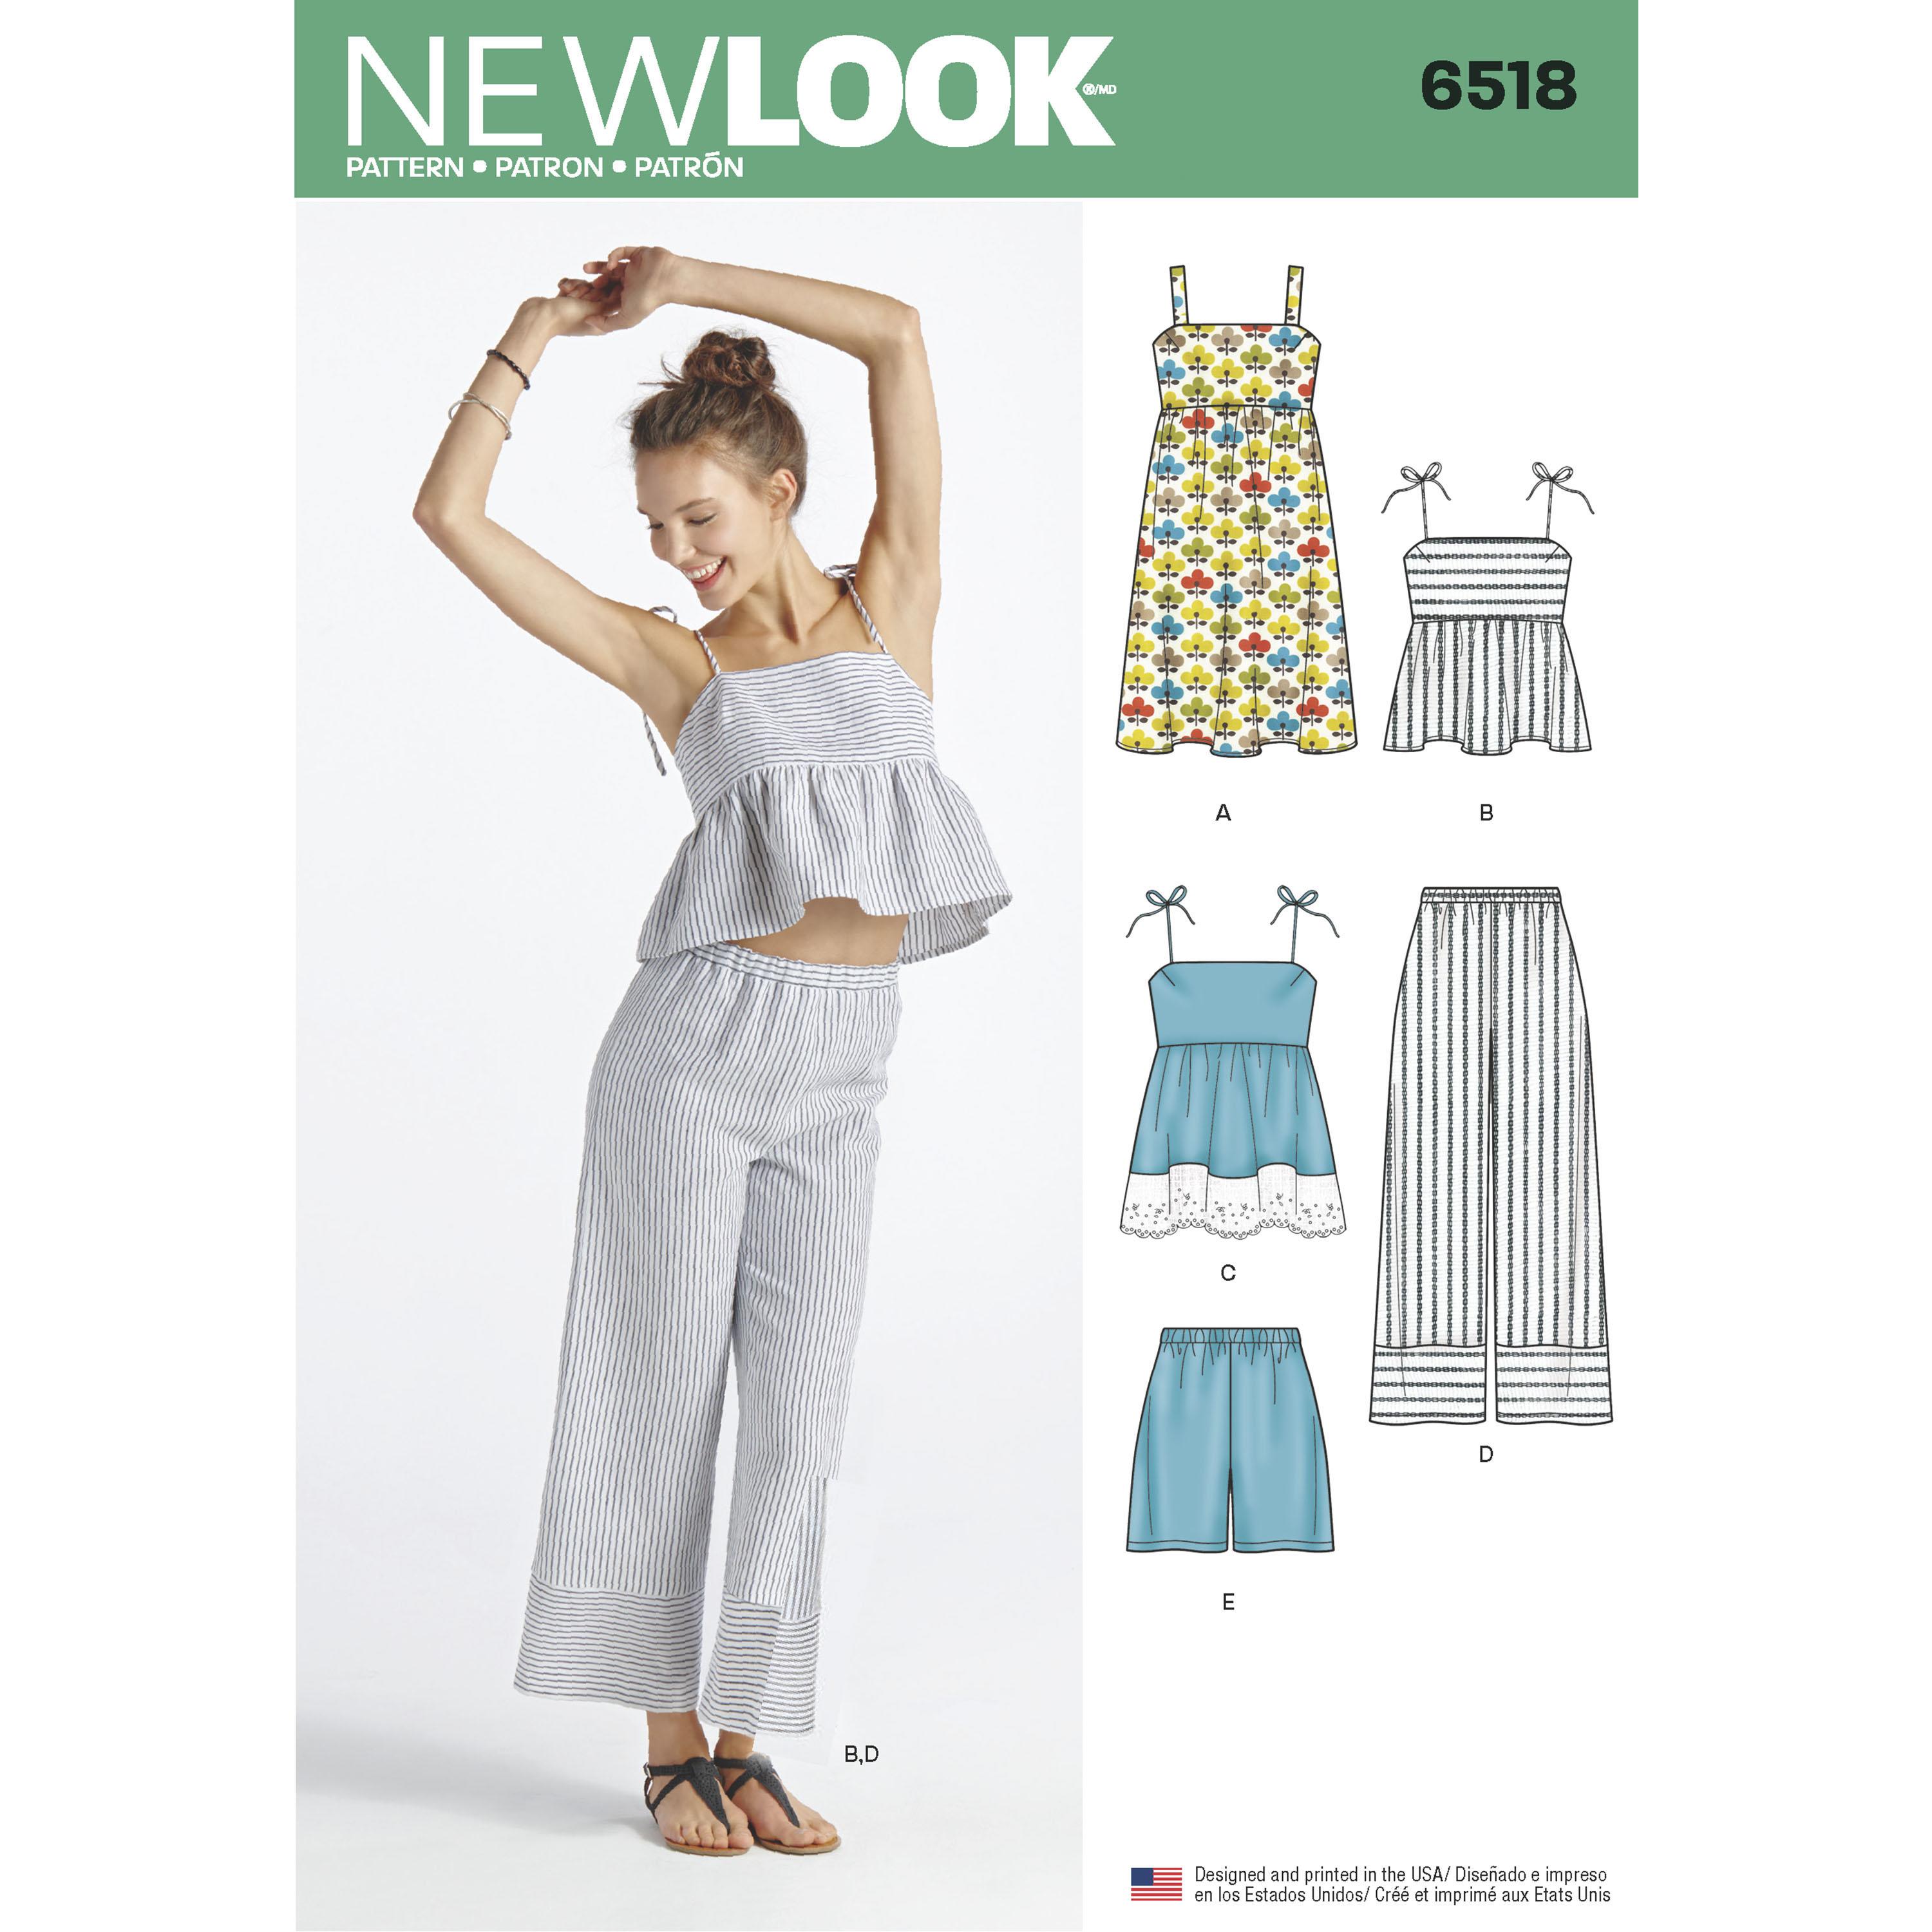 NewLook N6518 Women?s   Dress, Tops in Two Lengths, Pants, and Shorts